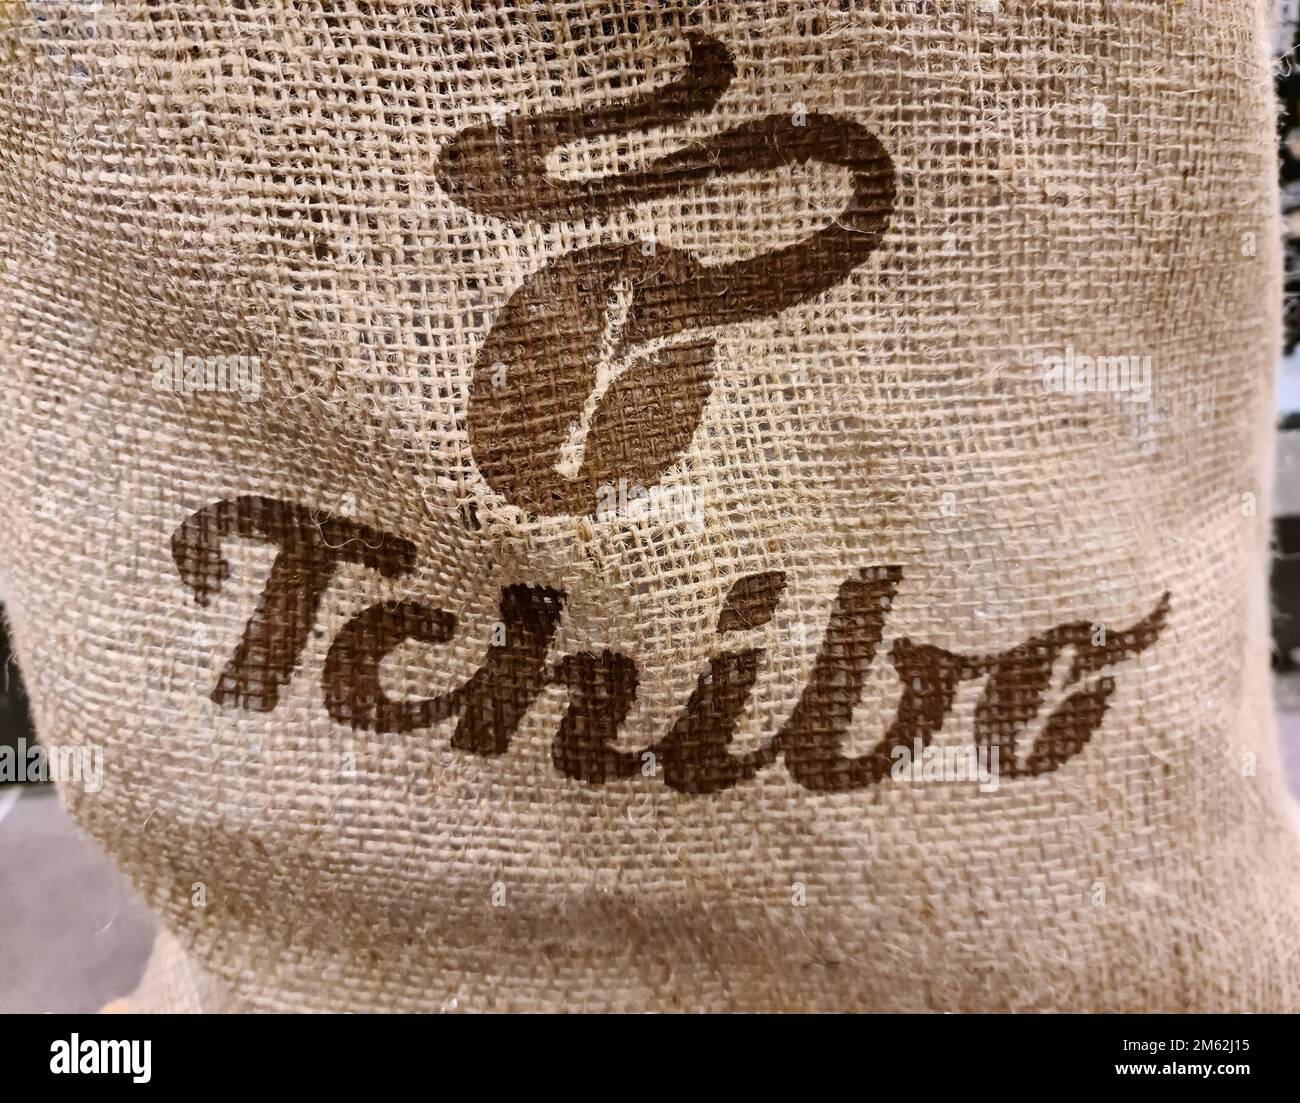 Kiel, Germany - 27.December 2022: A close-up of a Tchibo logo on an old coffee bag Stock Photo